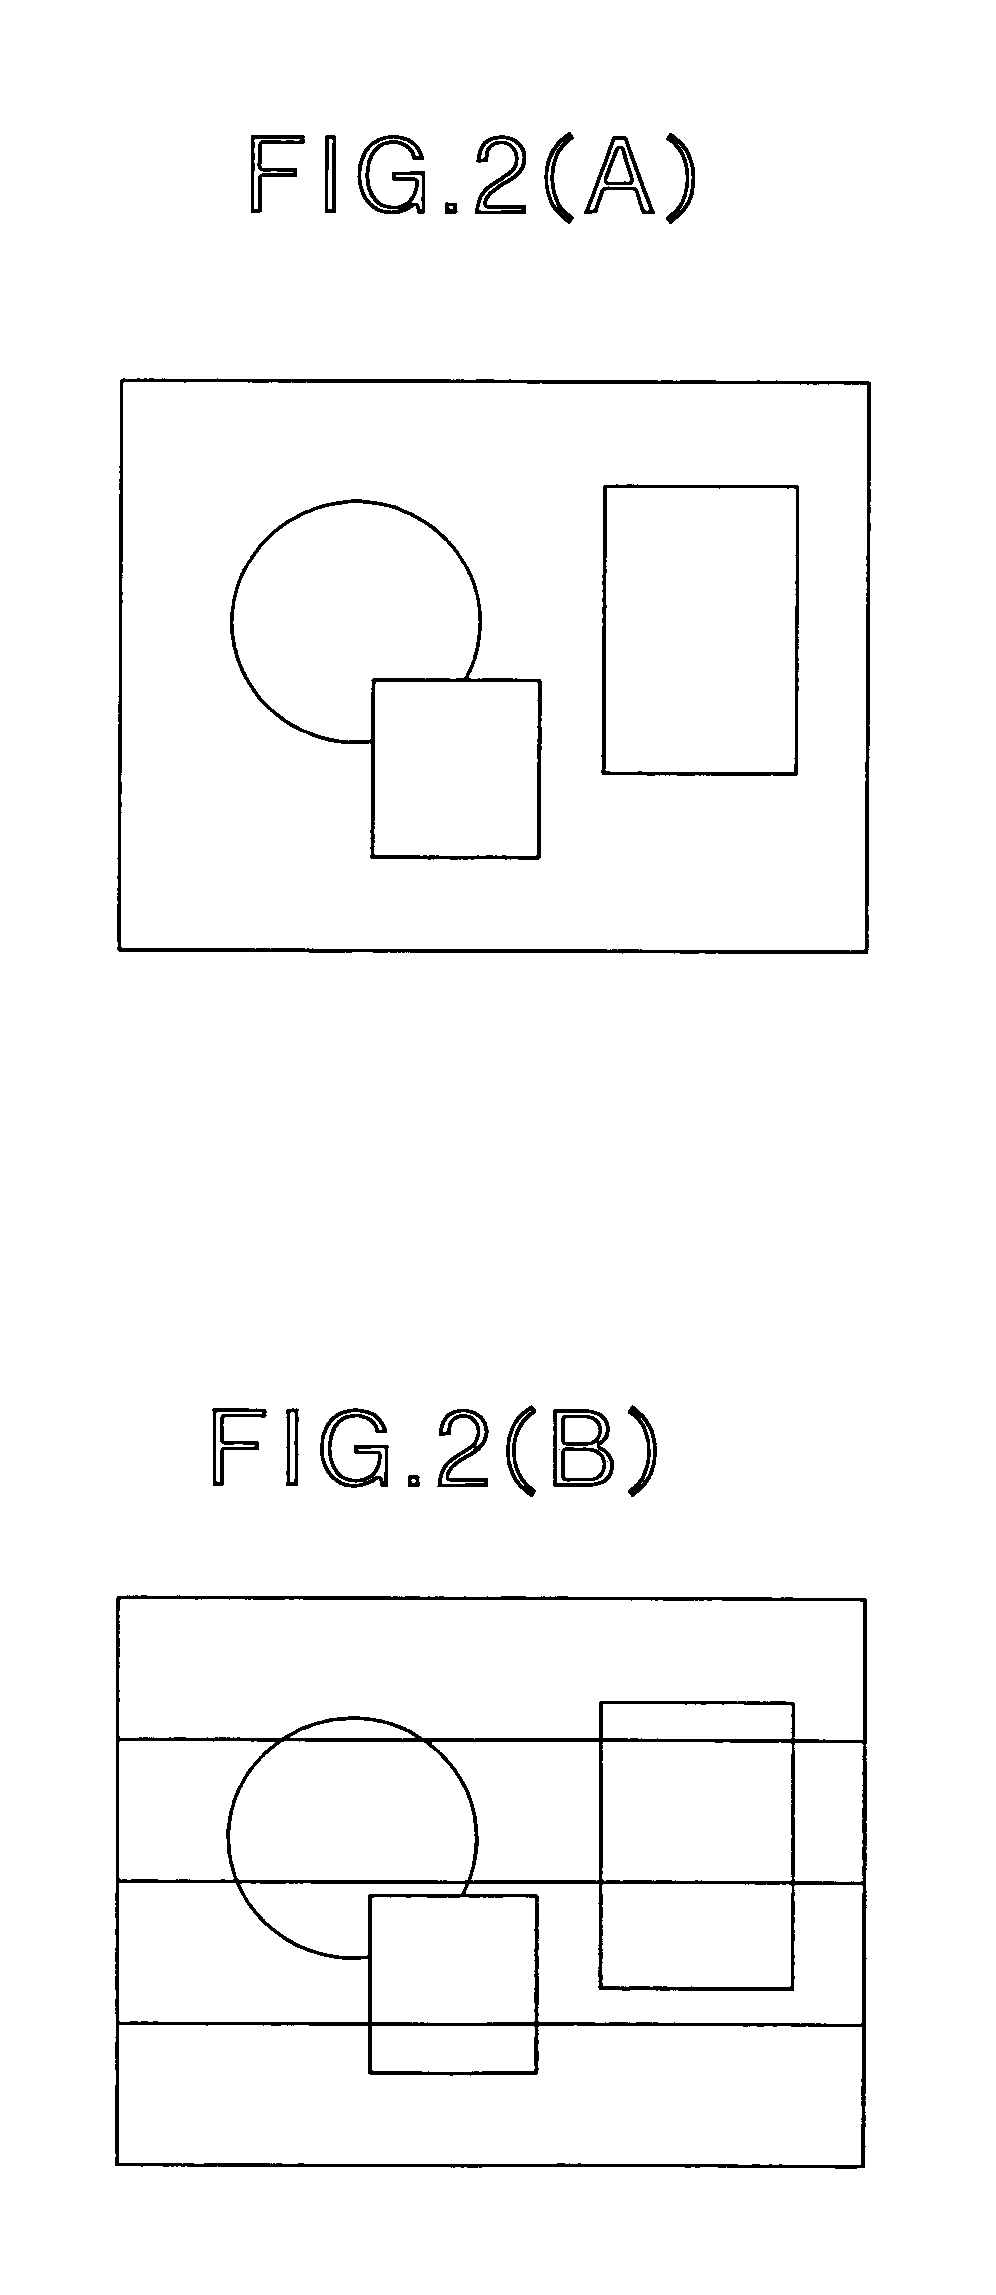 Video image coding apparatus with individual compression encoding sections for different image divisions